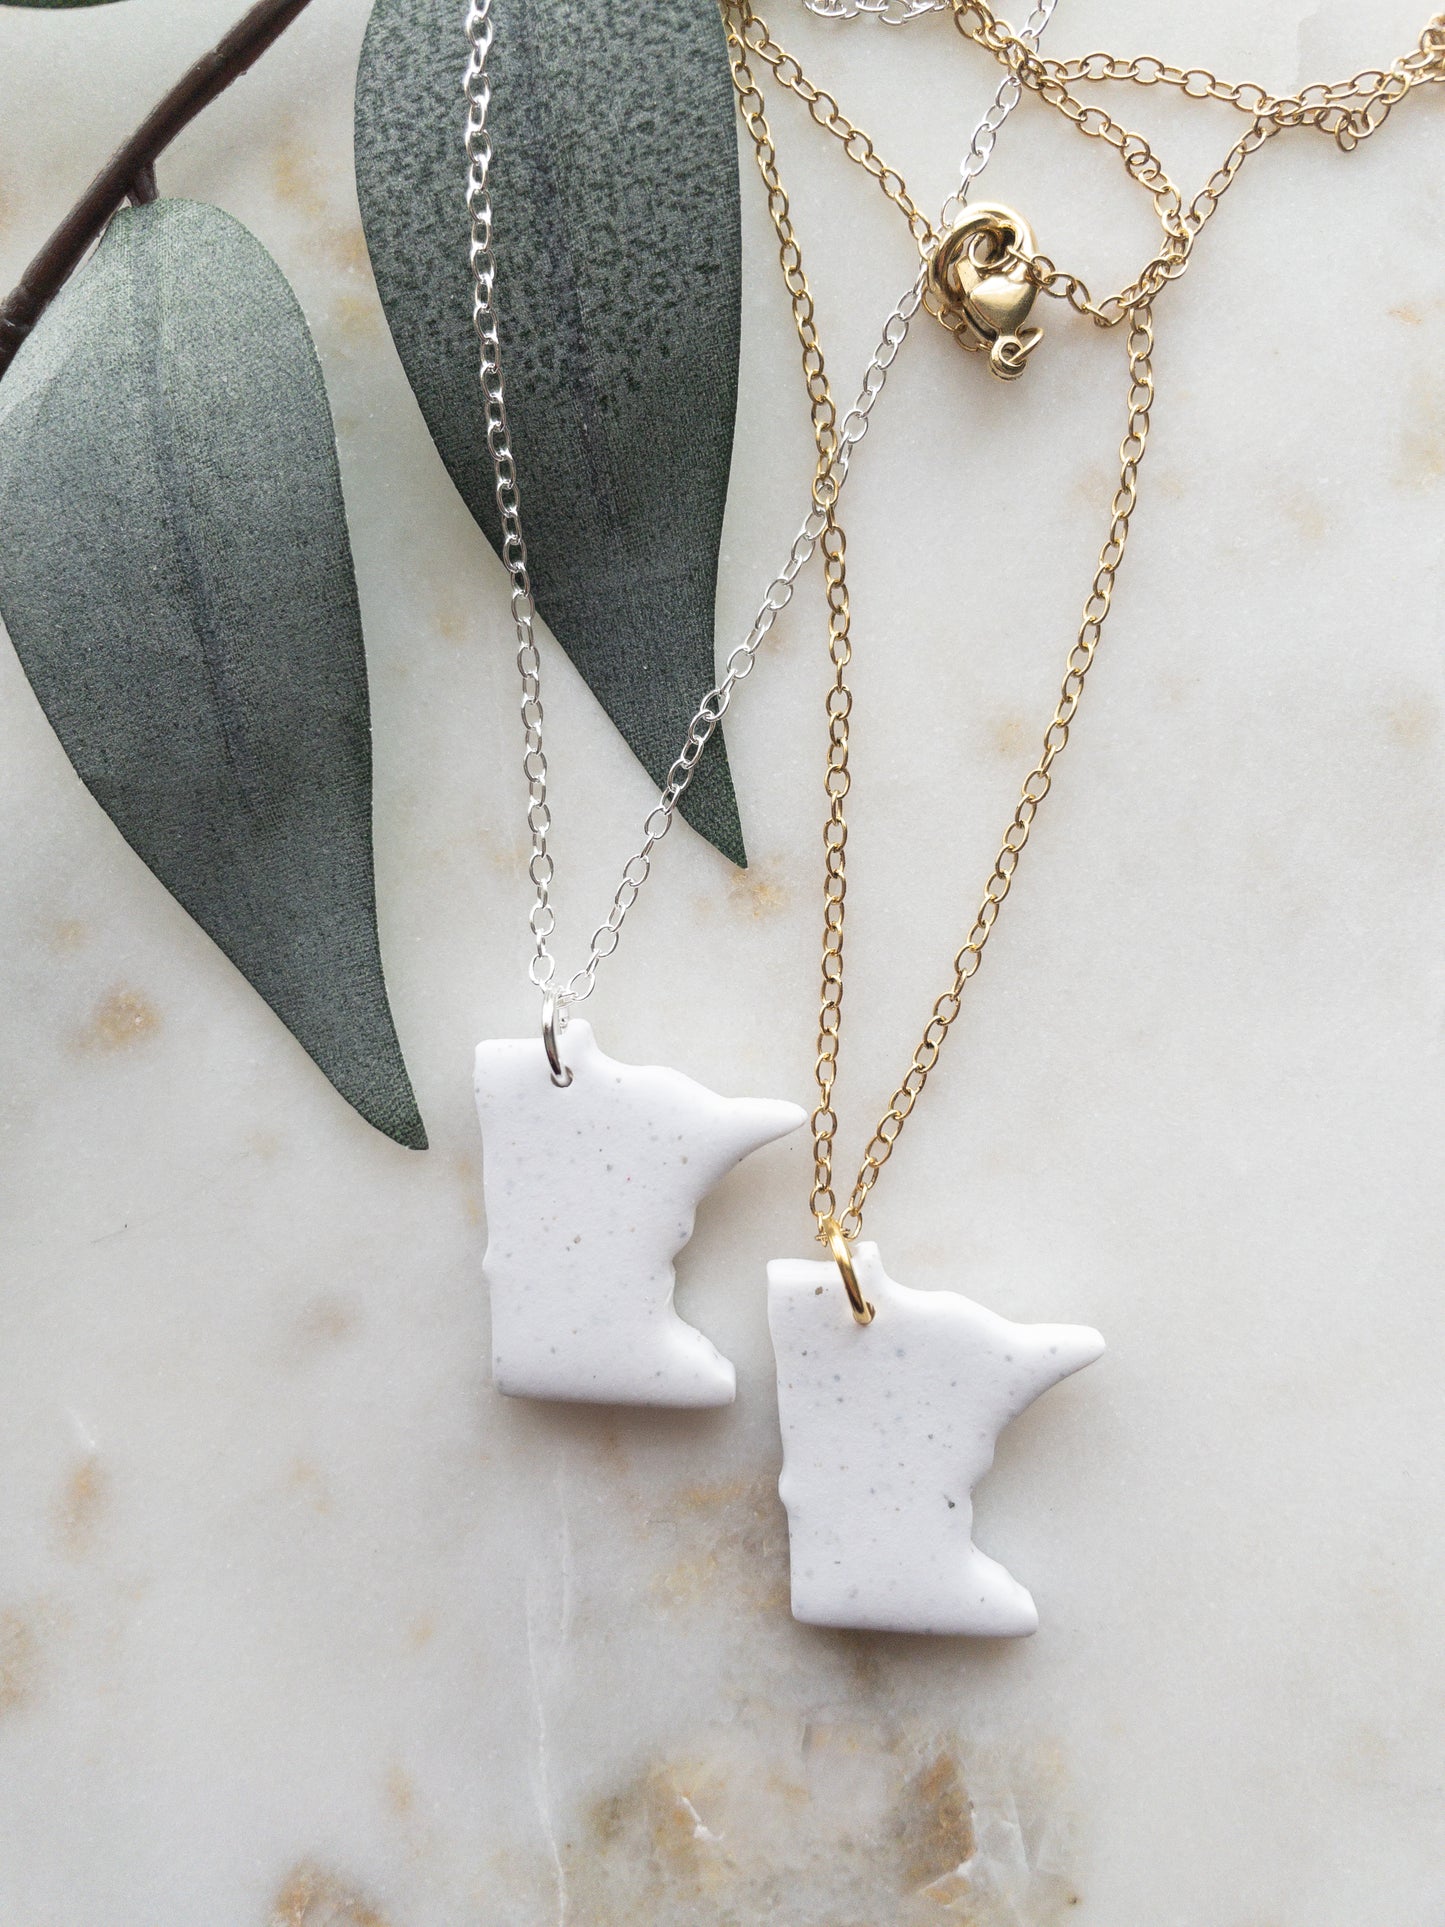 clay necklace | Minnesota necklace